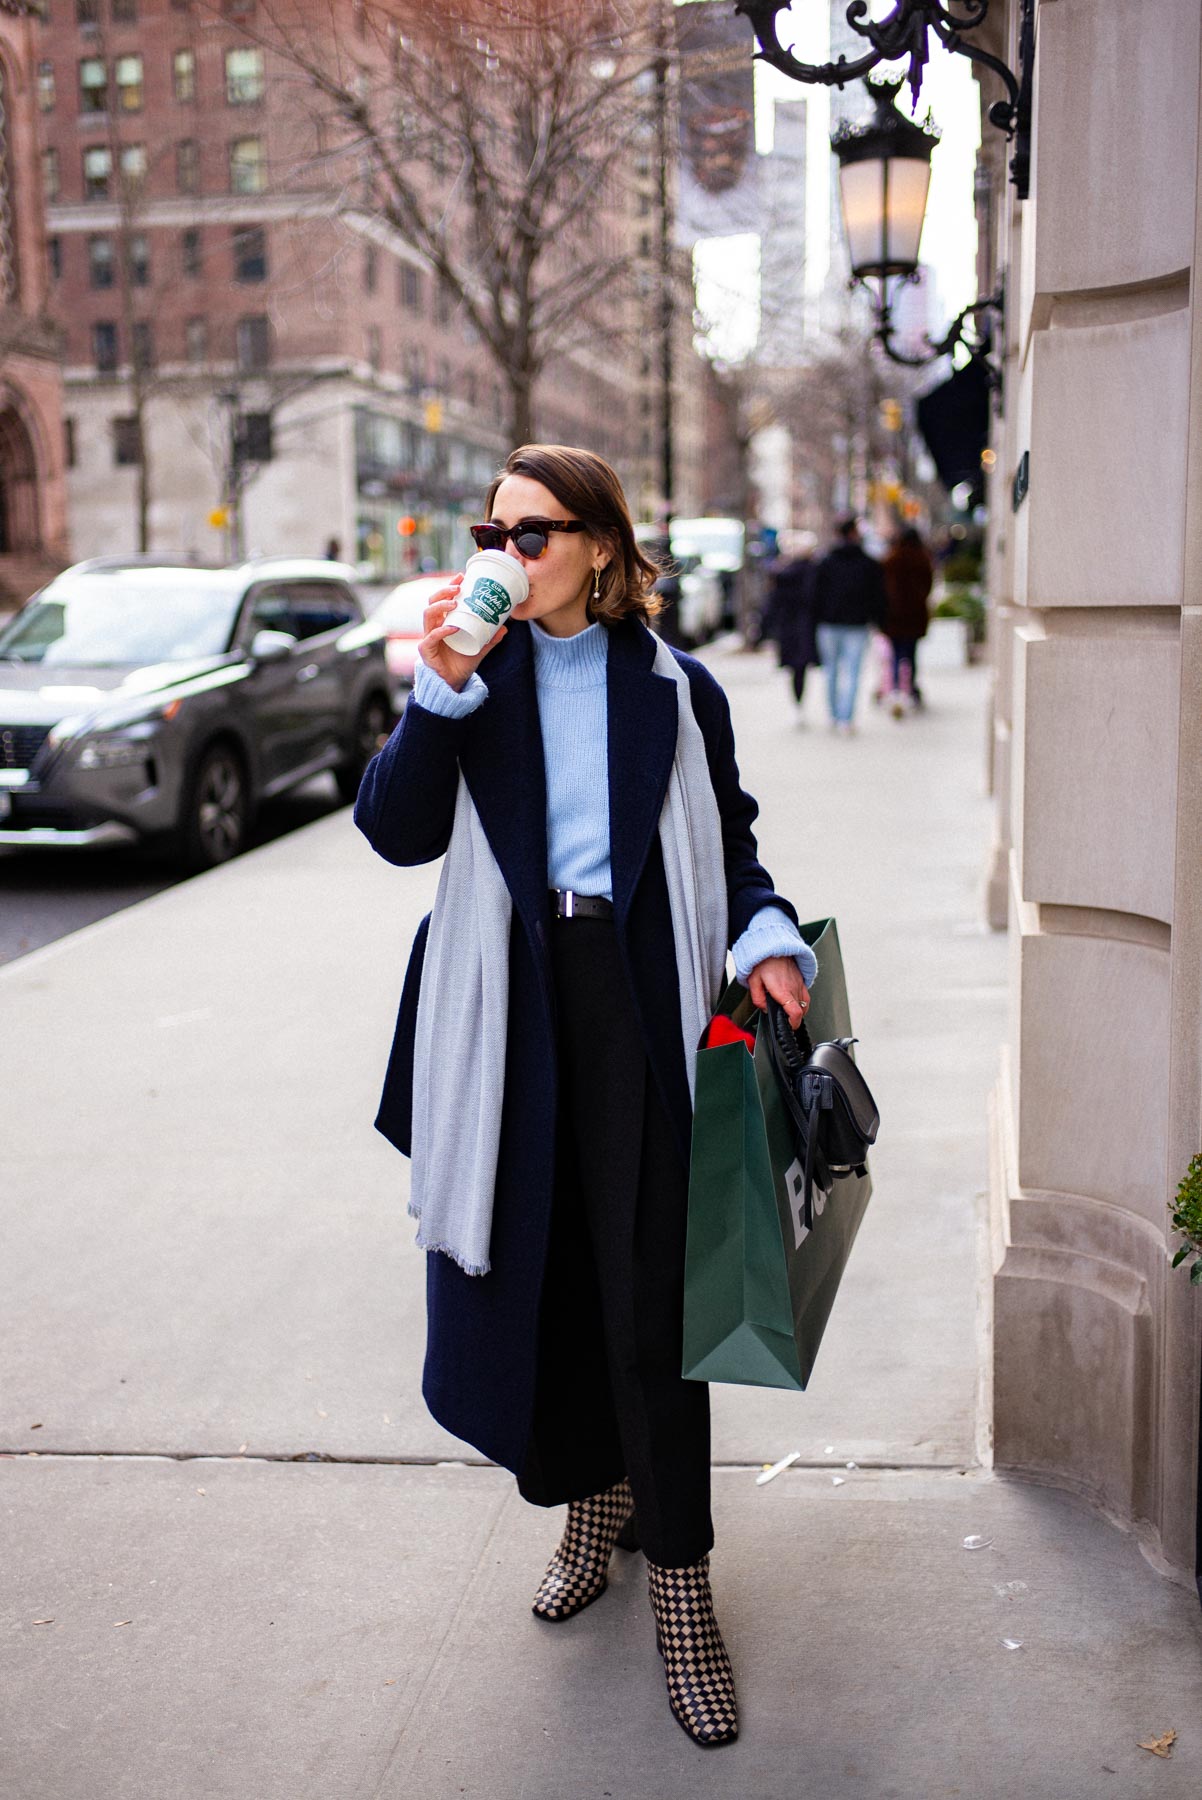 What to wear in New York City in the winter